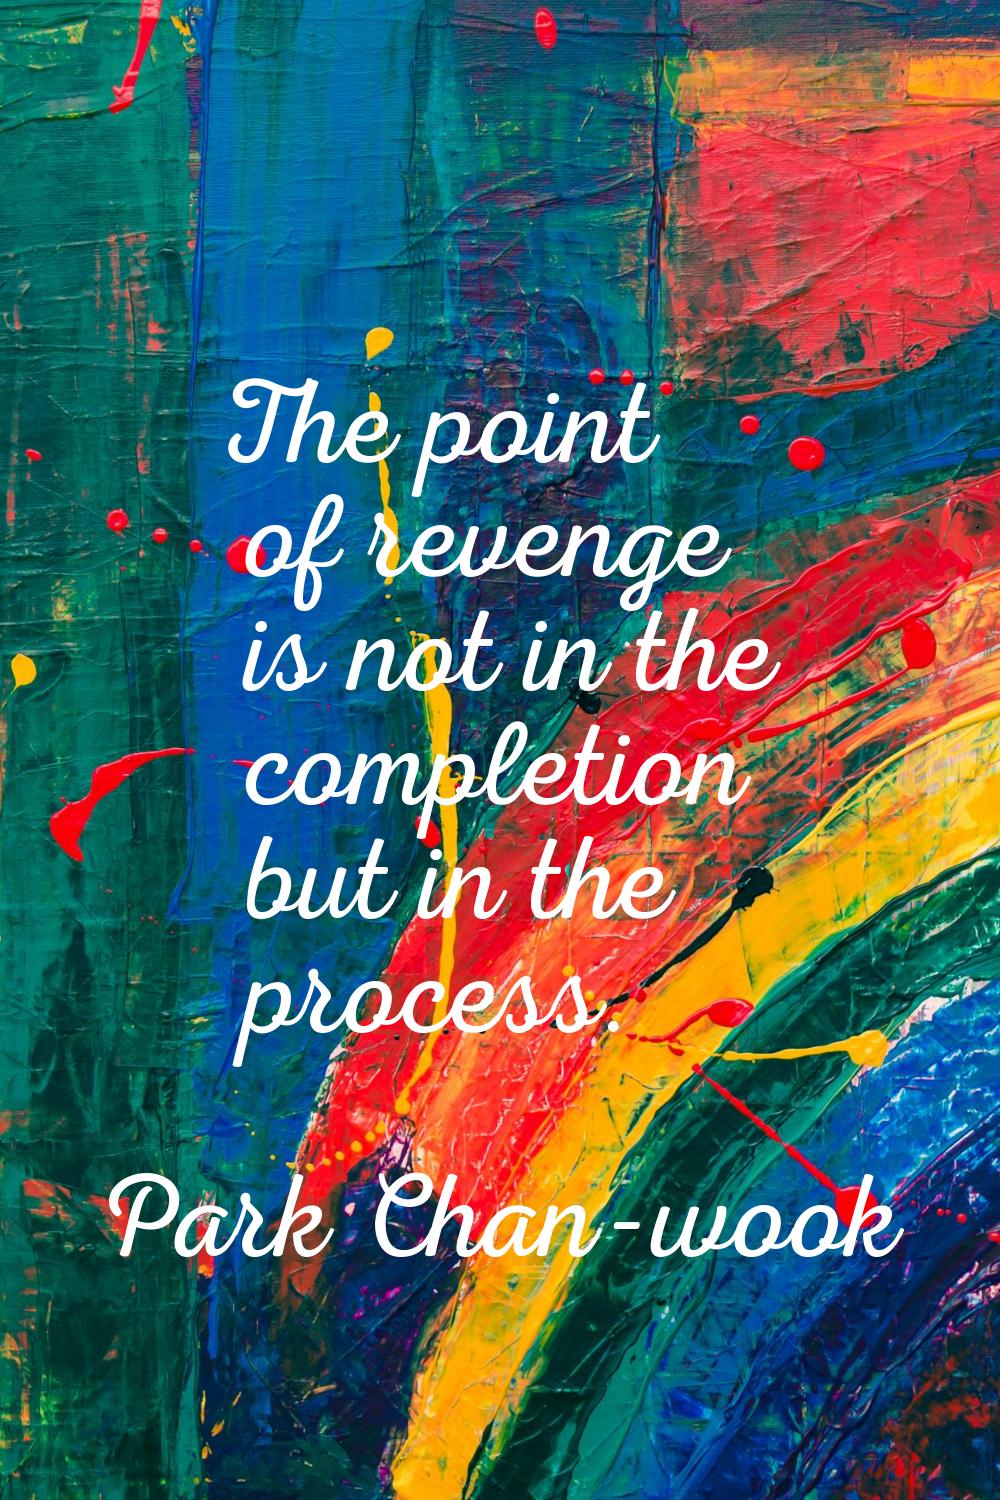 The point of revenge is not in the completion but in the process.